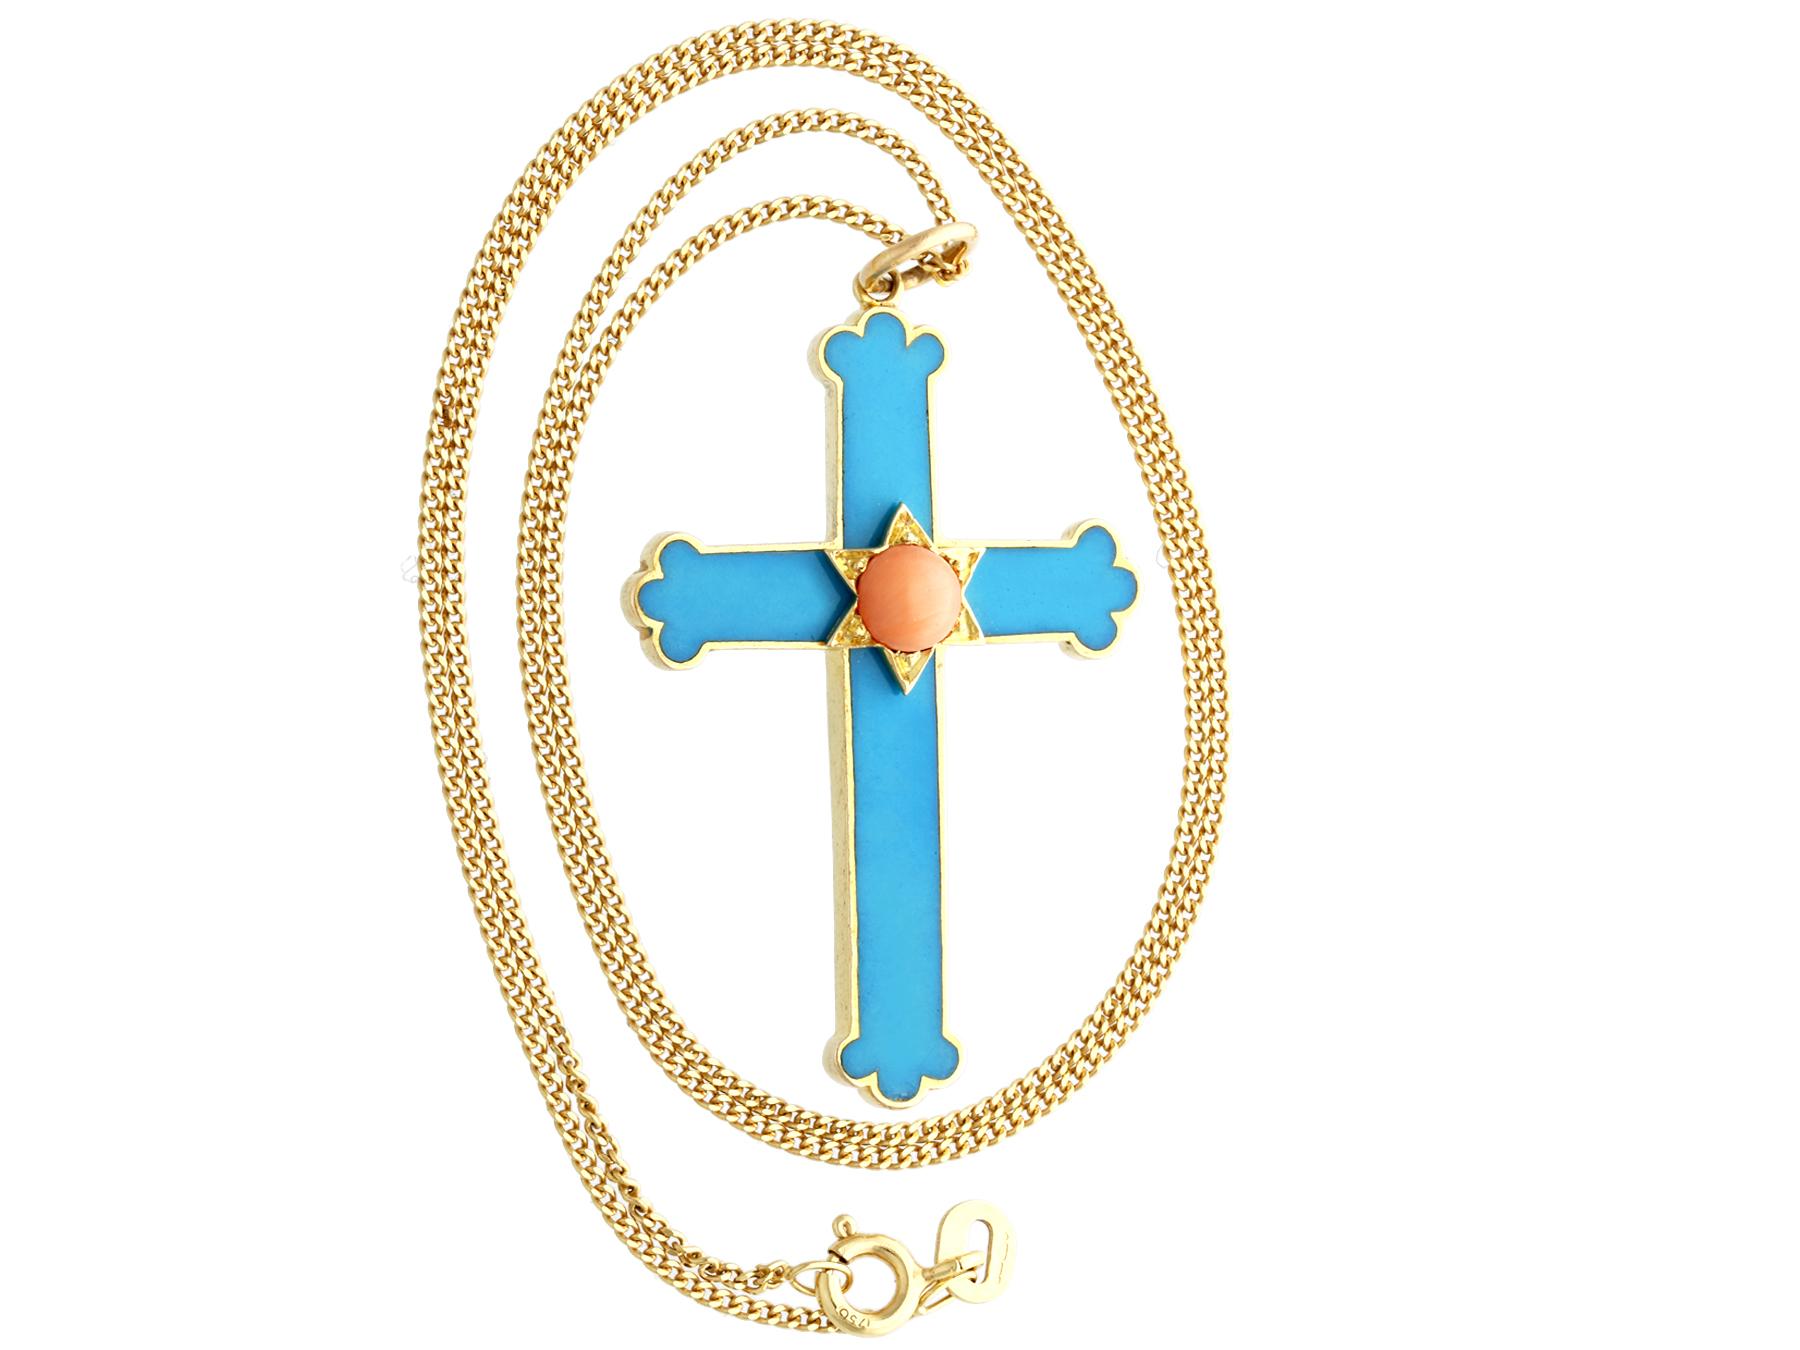 A fine and impressive antique 0.38 carat coral and 14 karat yellow gold cross pendant; part of our diverse diamond jewelry and estate jewelry collections.

This fine and impressive antique pendant has been crafted in 14k yellow gold.

The pendant